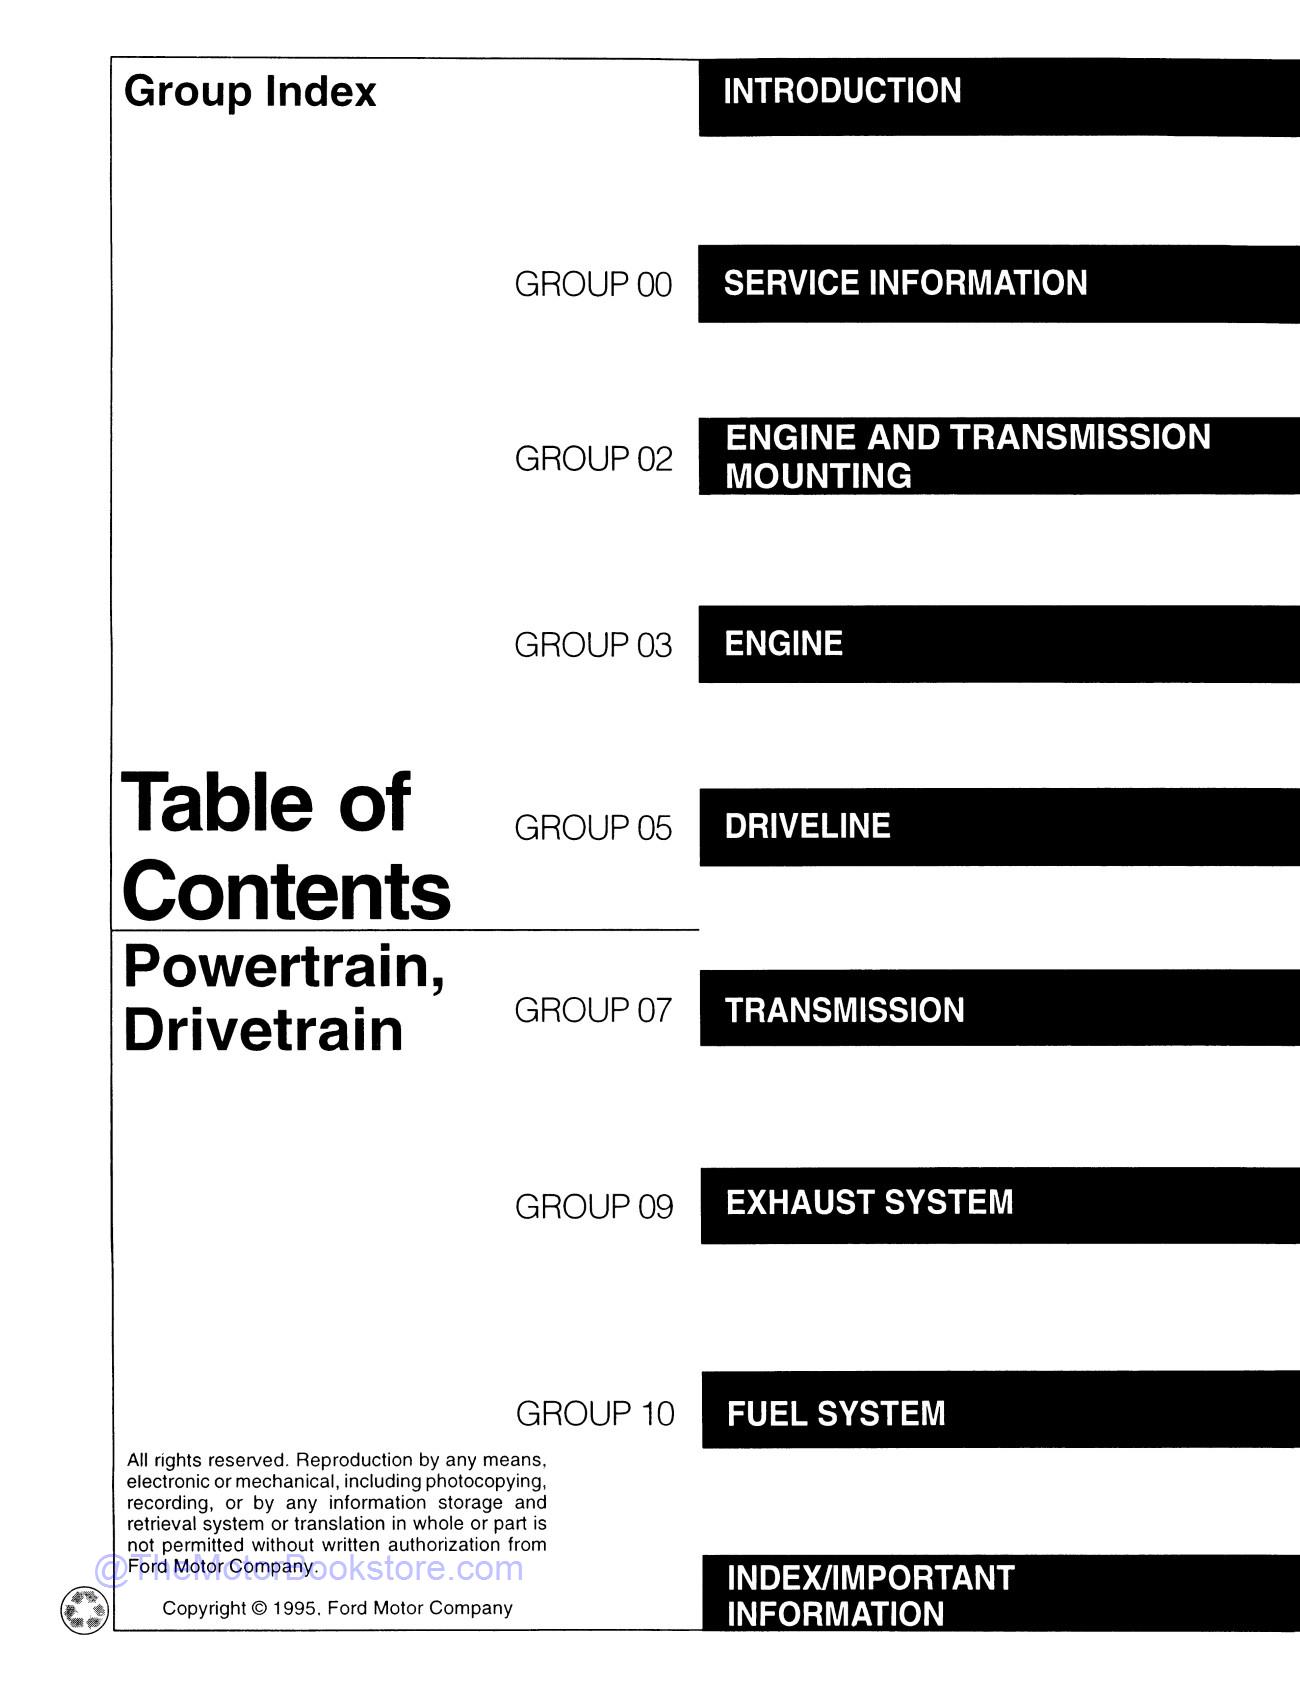 1996 Ford Econoline Service Manual  - Table of Contents 2